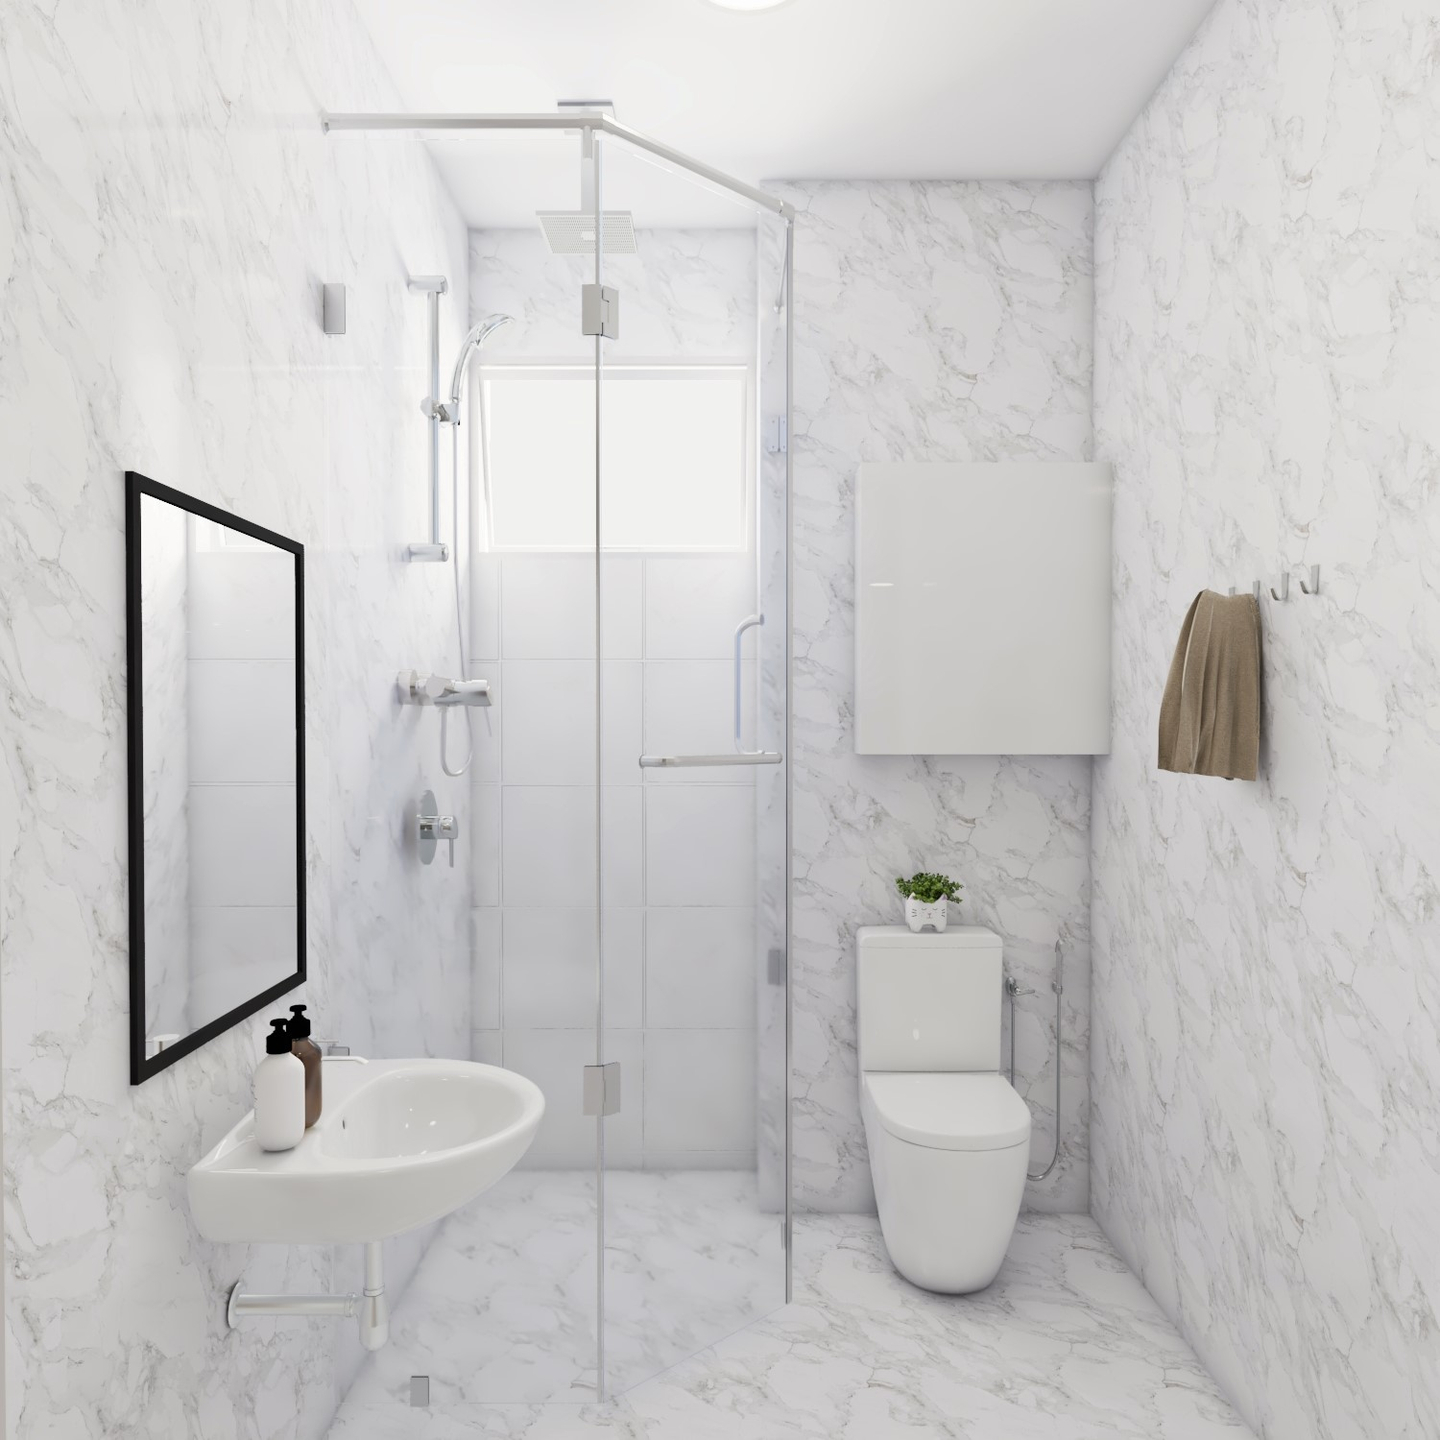 Compact White Bathroom Design With Black Framed Mirror | Livspace